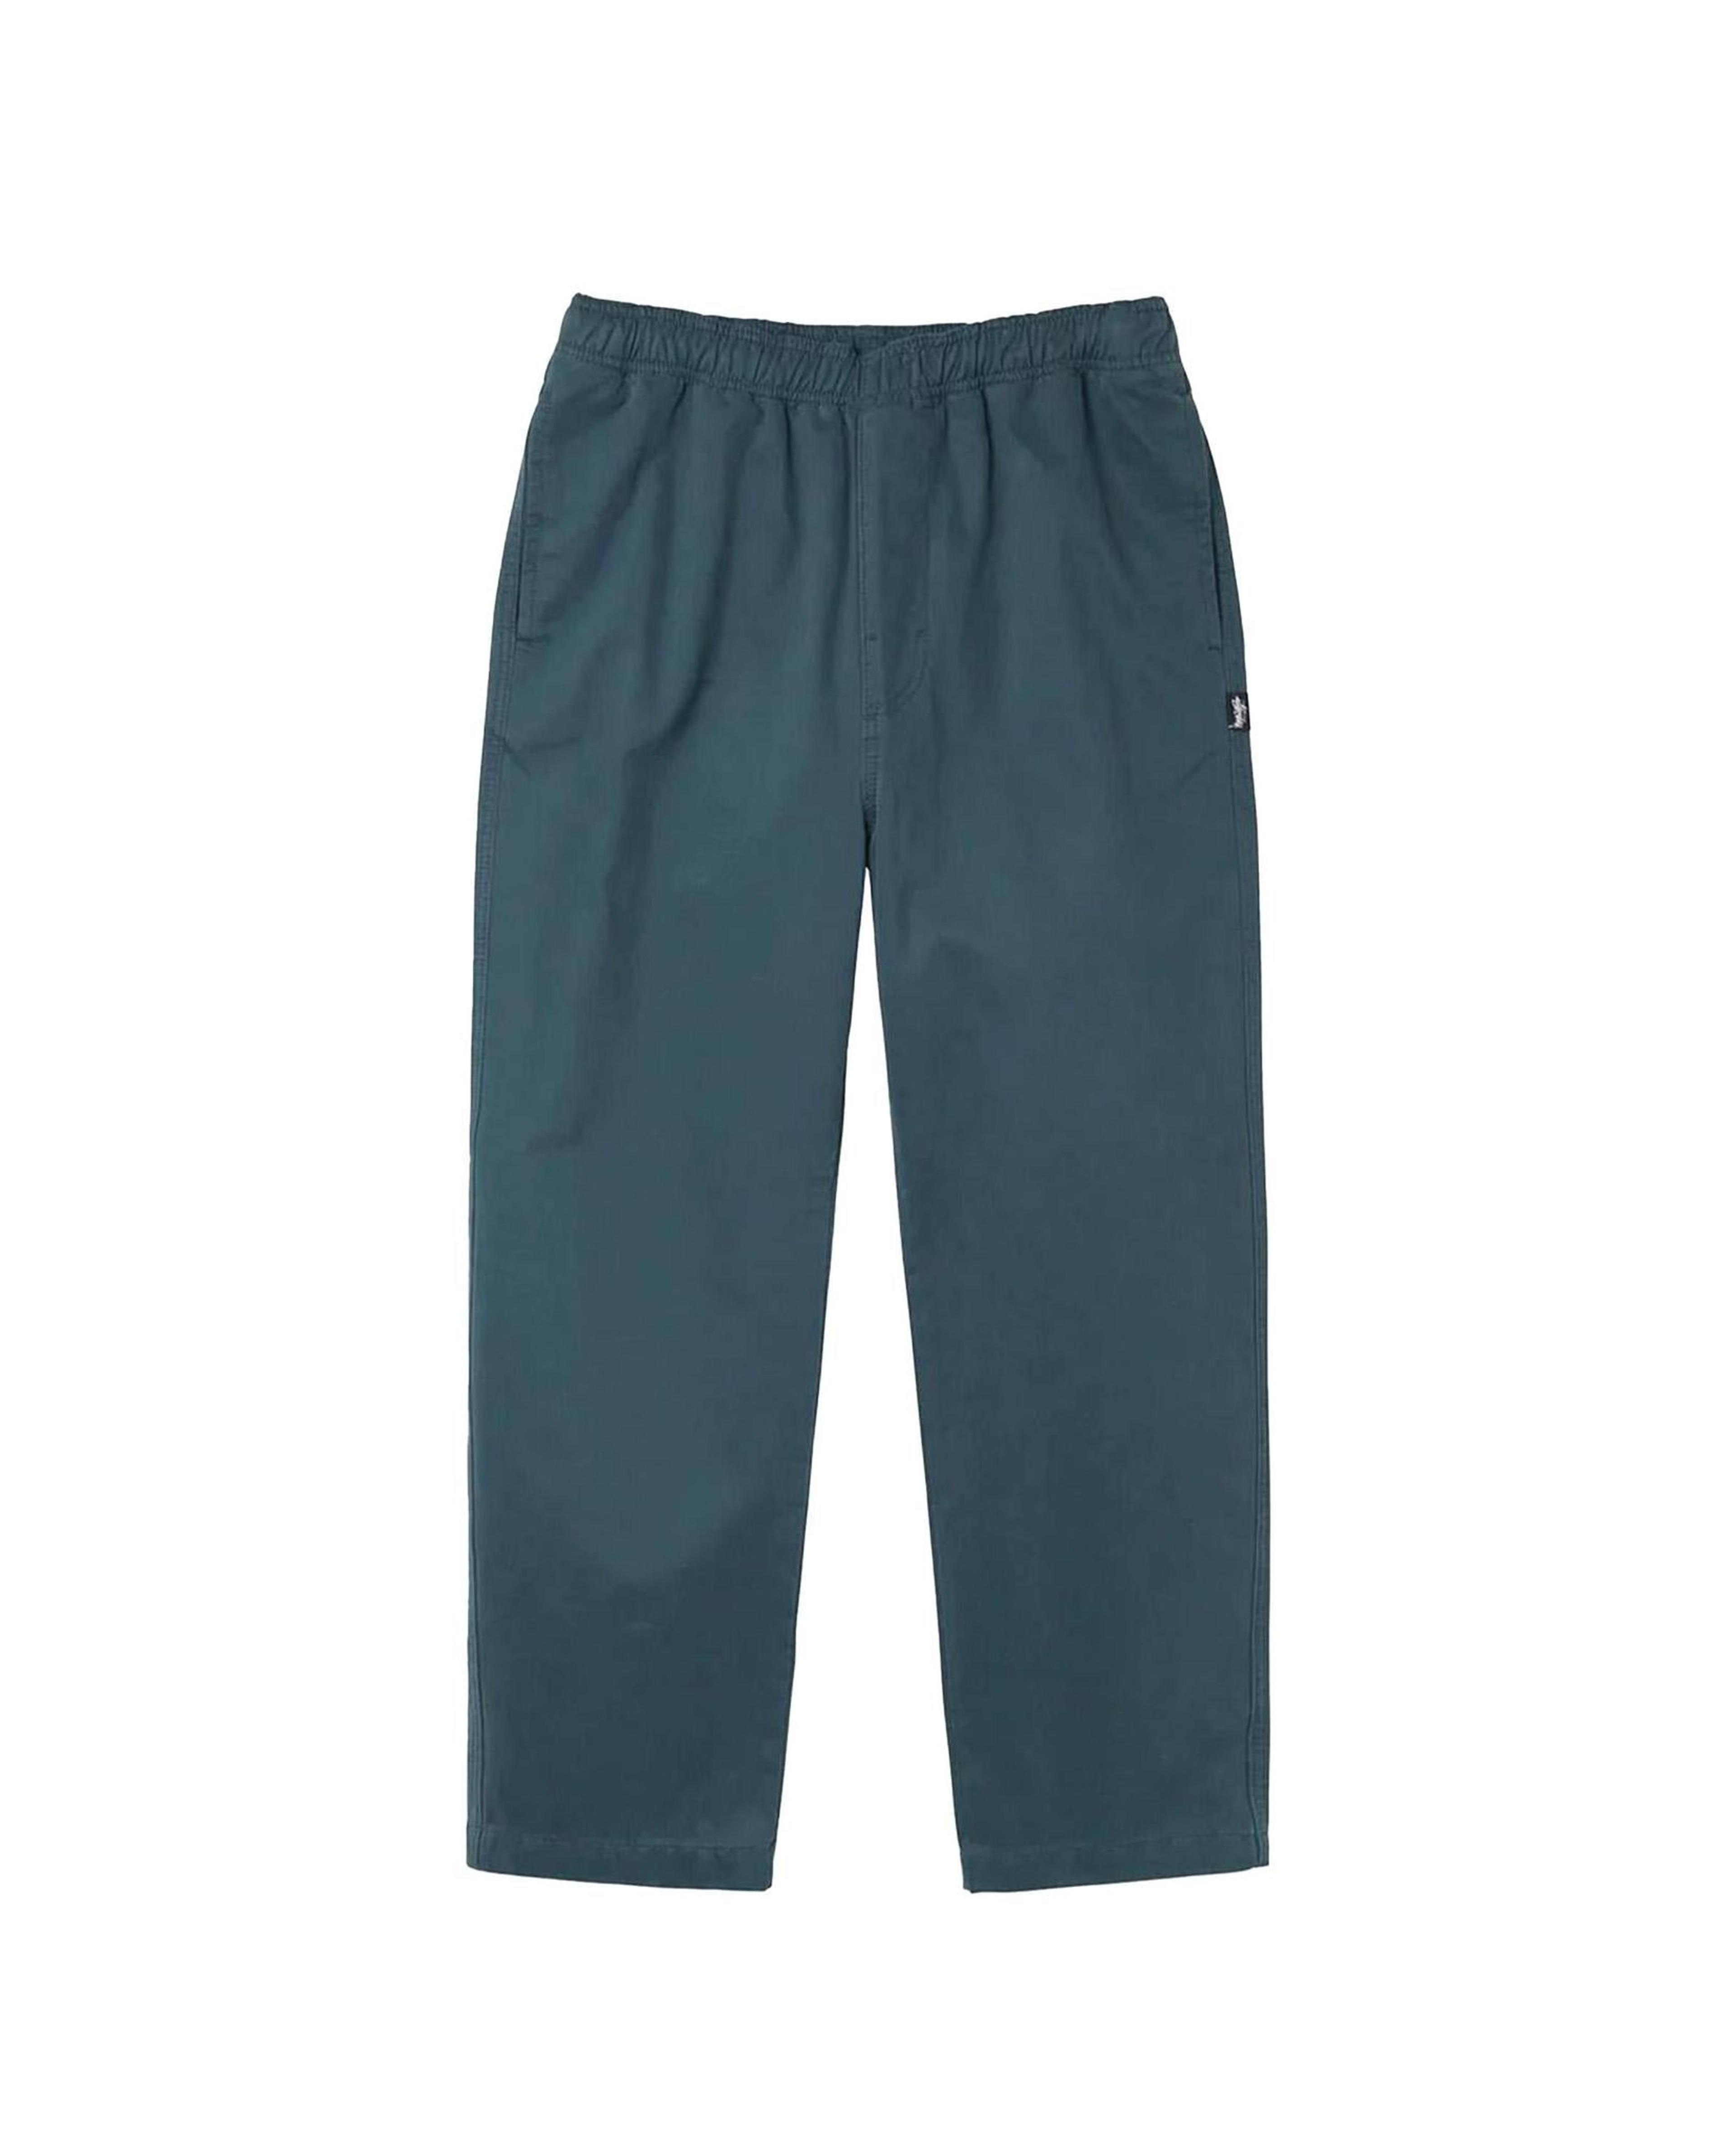 Alternate View 6 of Stussy Brushed Beach Pant